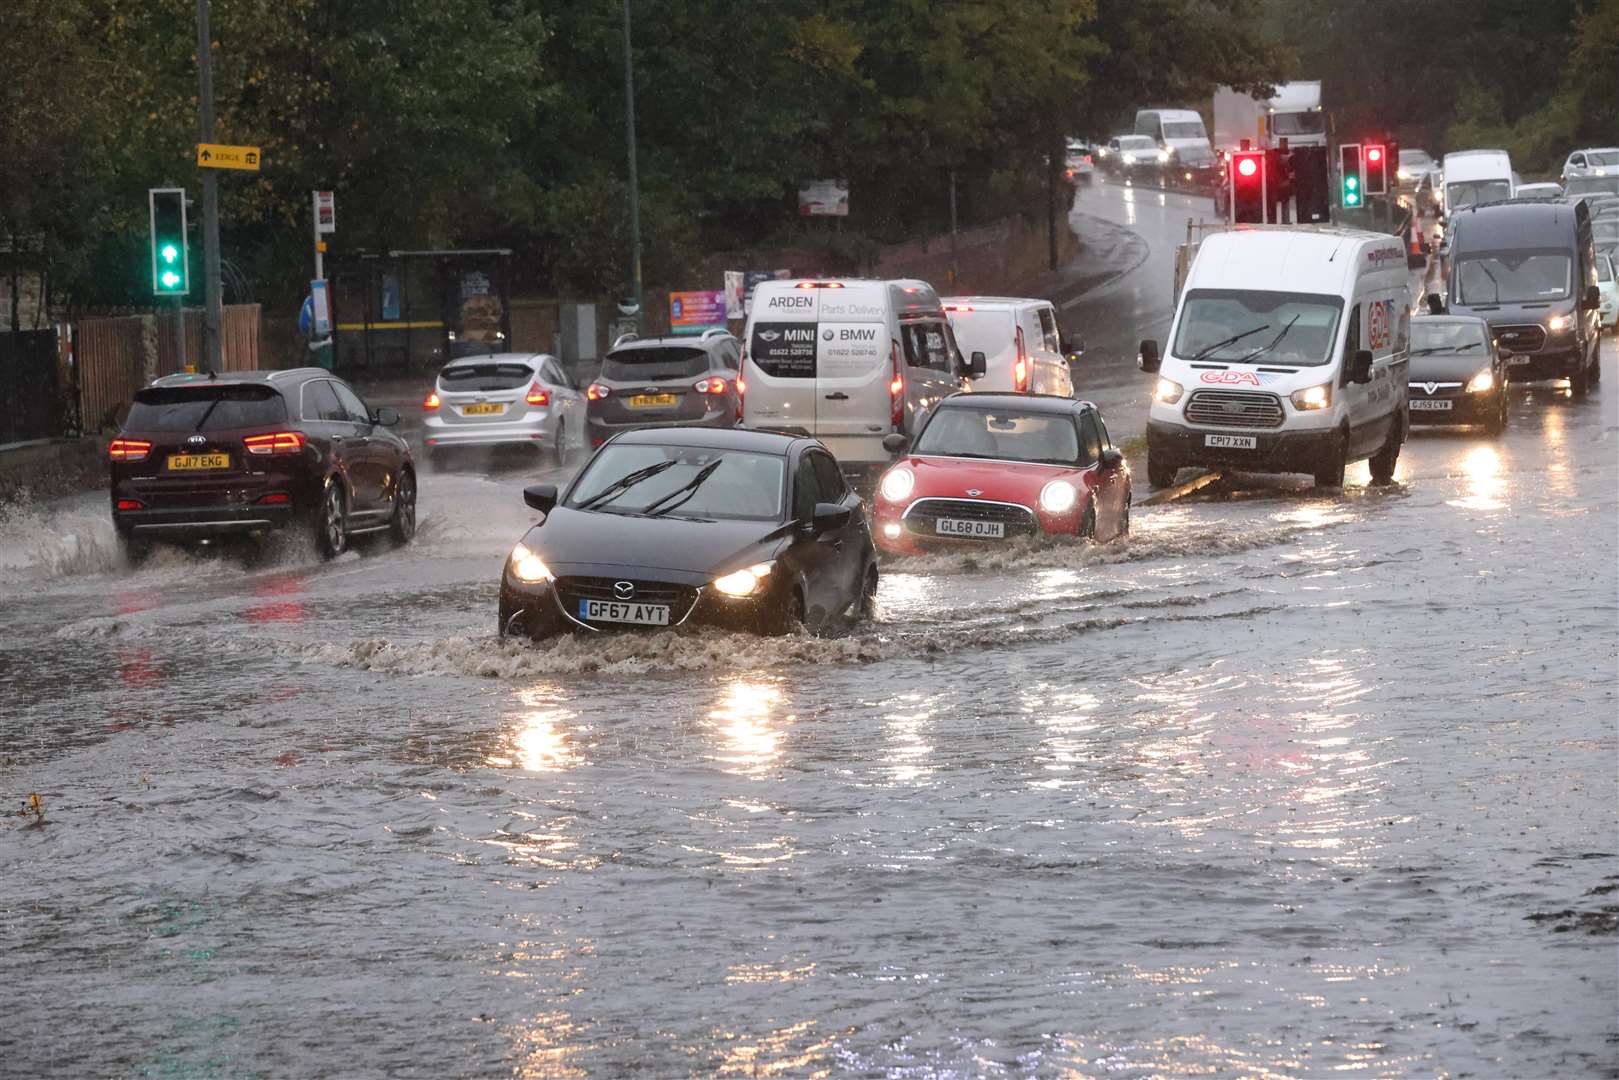 Flooding in London Road, Aylesford. Picture: UKNIP from November 3